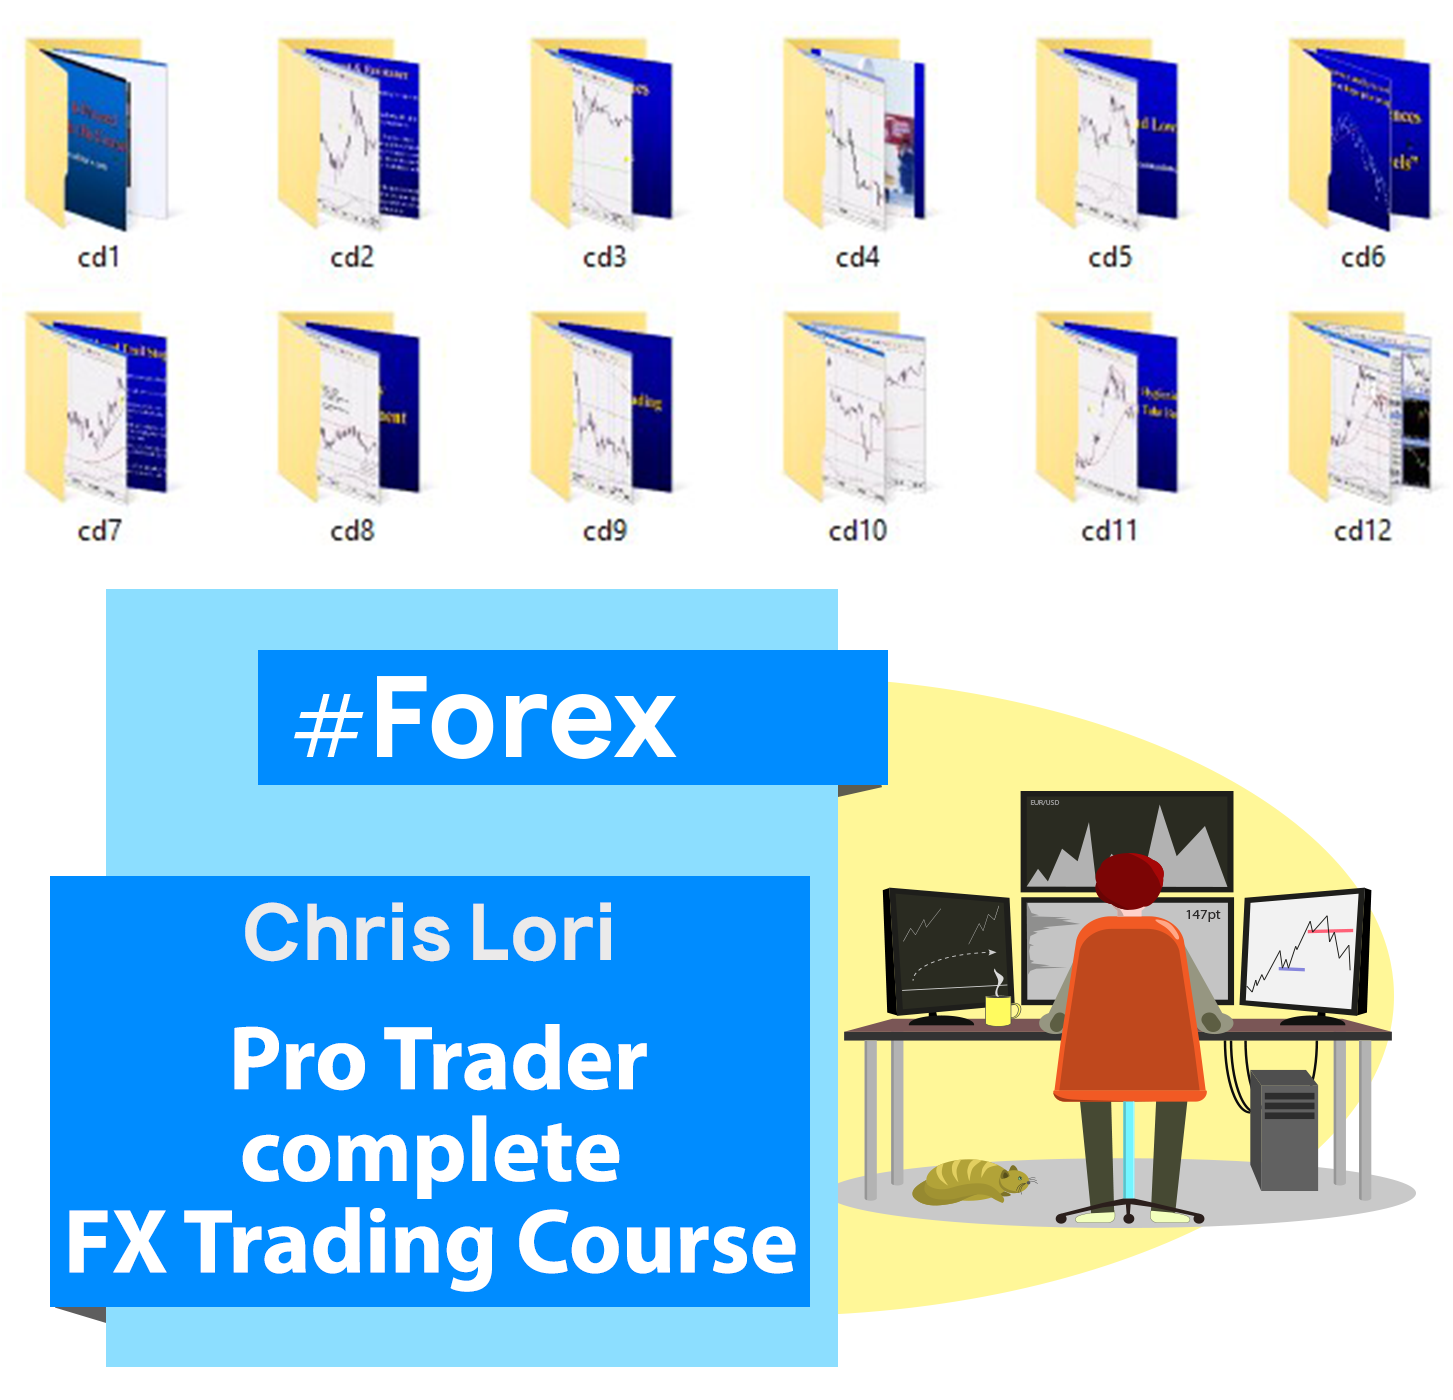 pro trader complete fx course chris lori forex